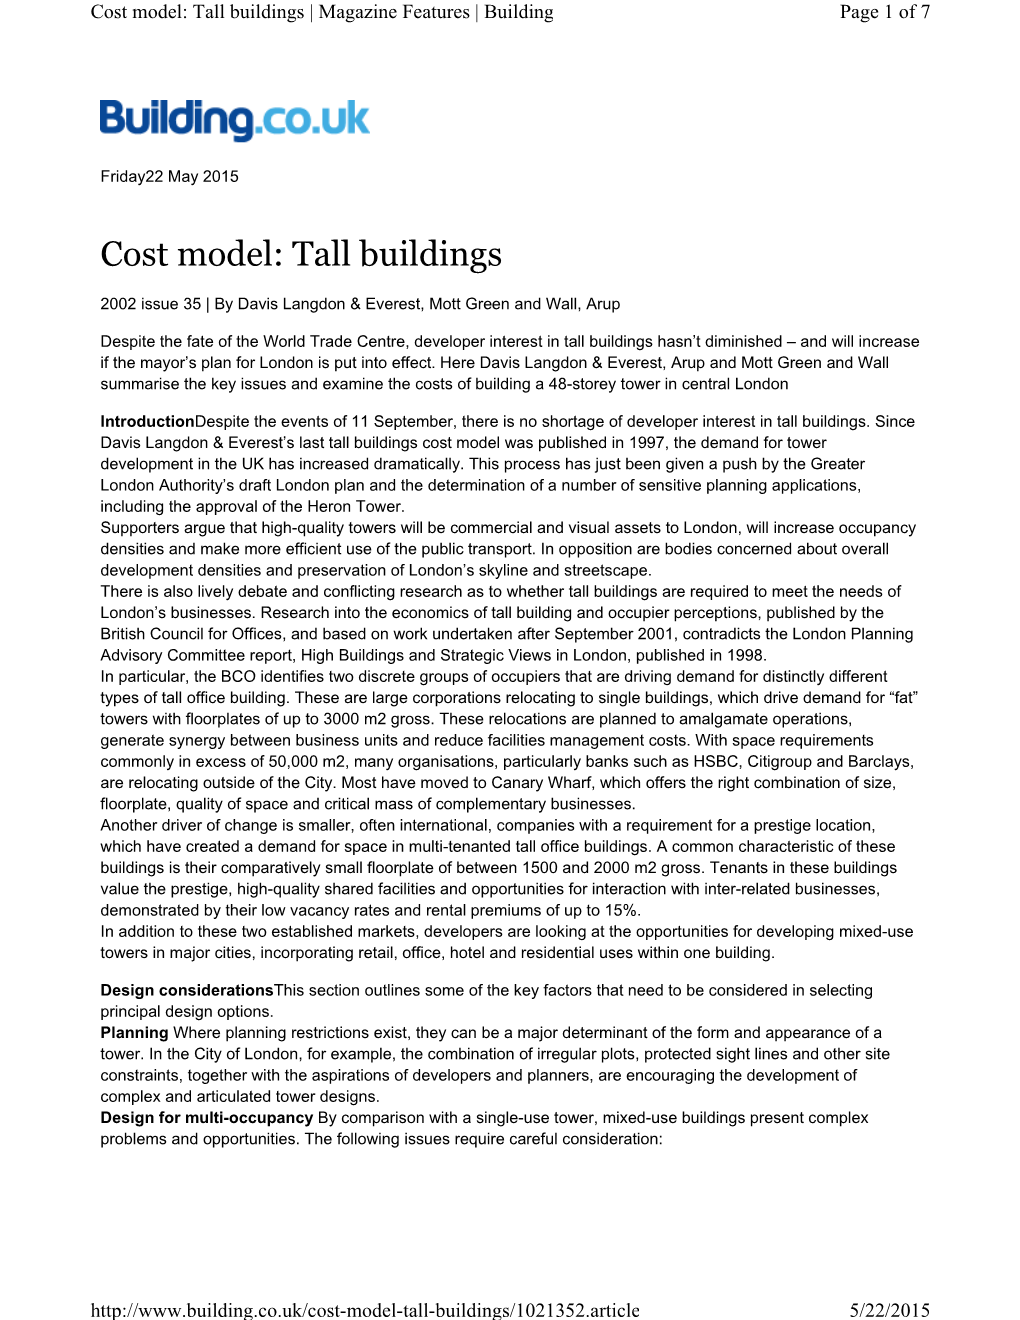 Cost Model: Tall Buildings | Magazine Features | Building Page 1 of 7